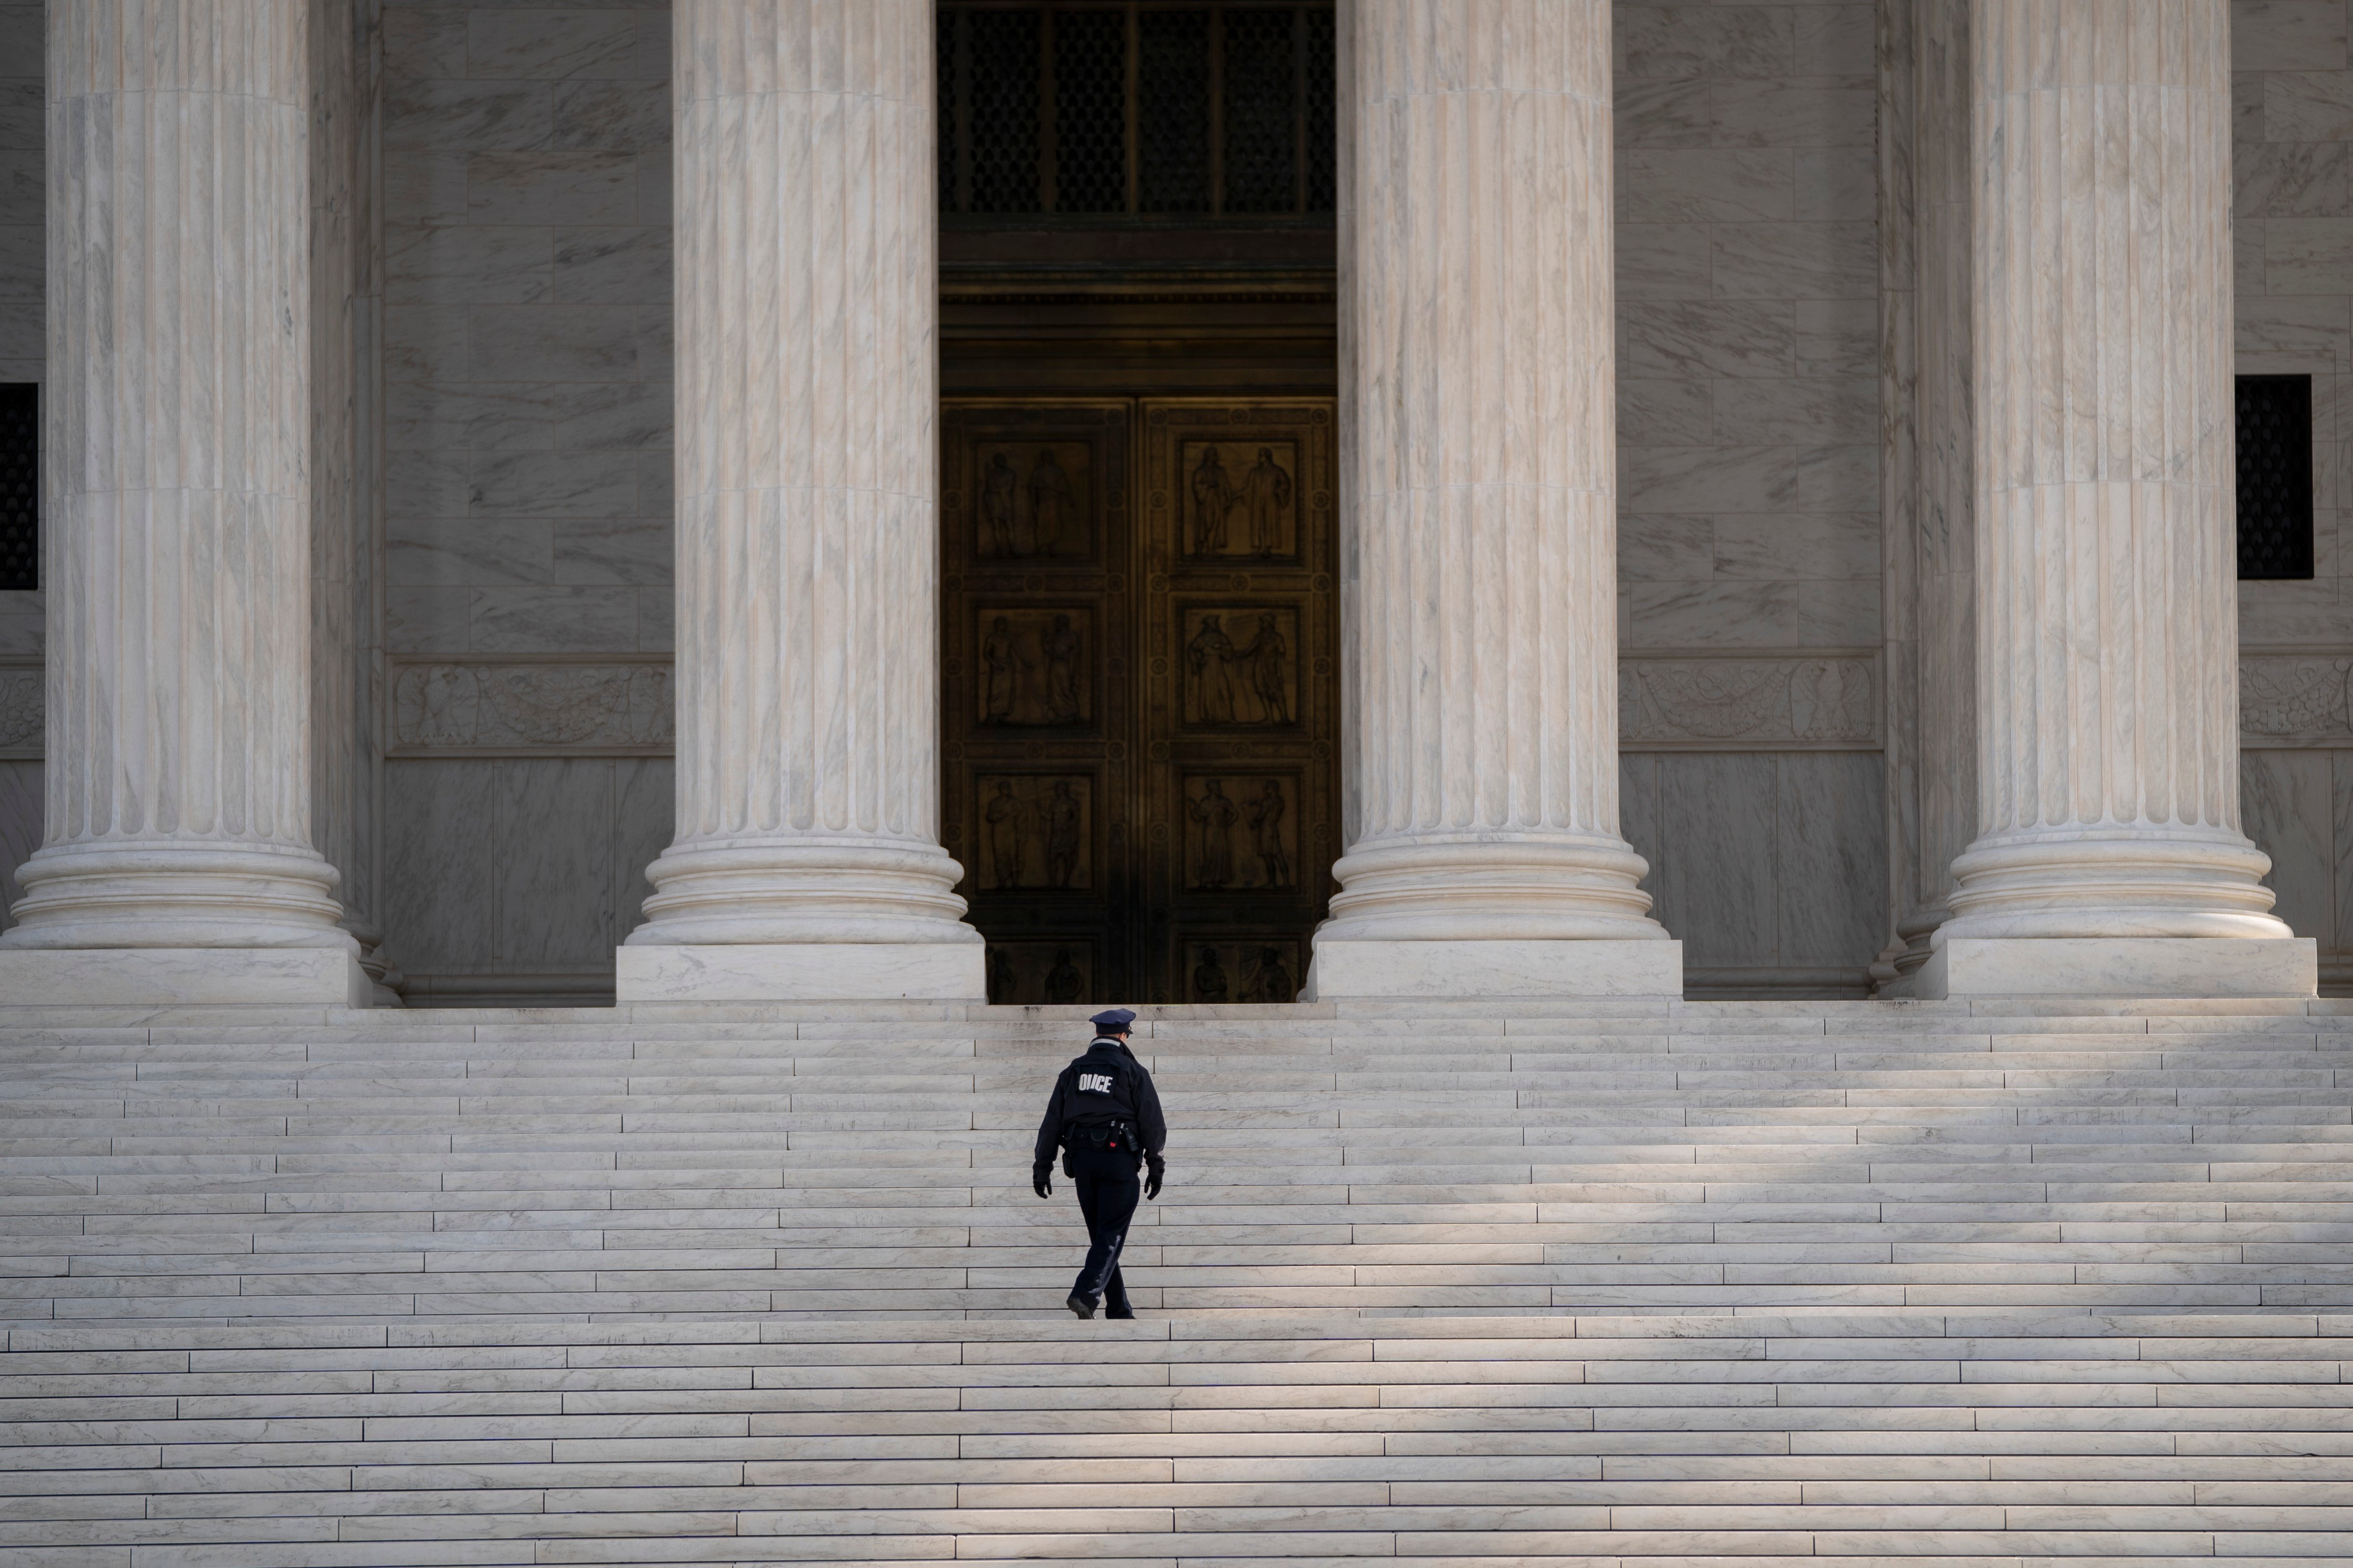 U.S. Supreme Court Cancels All Oral Arguments Through Early April Due To COVID-19